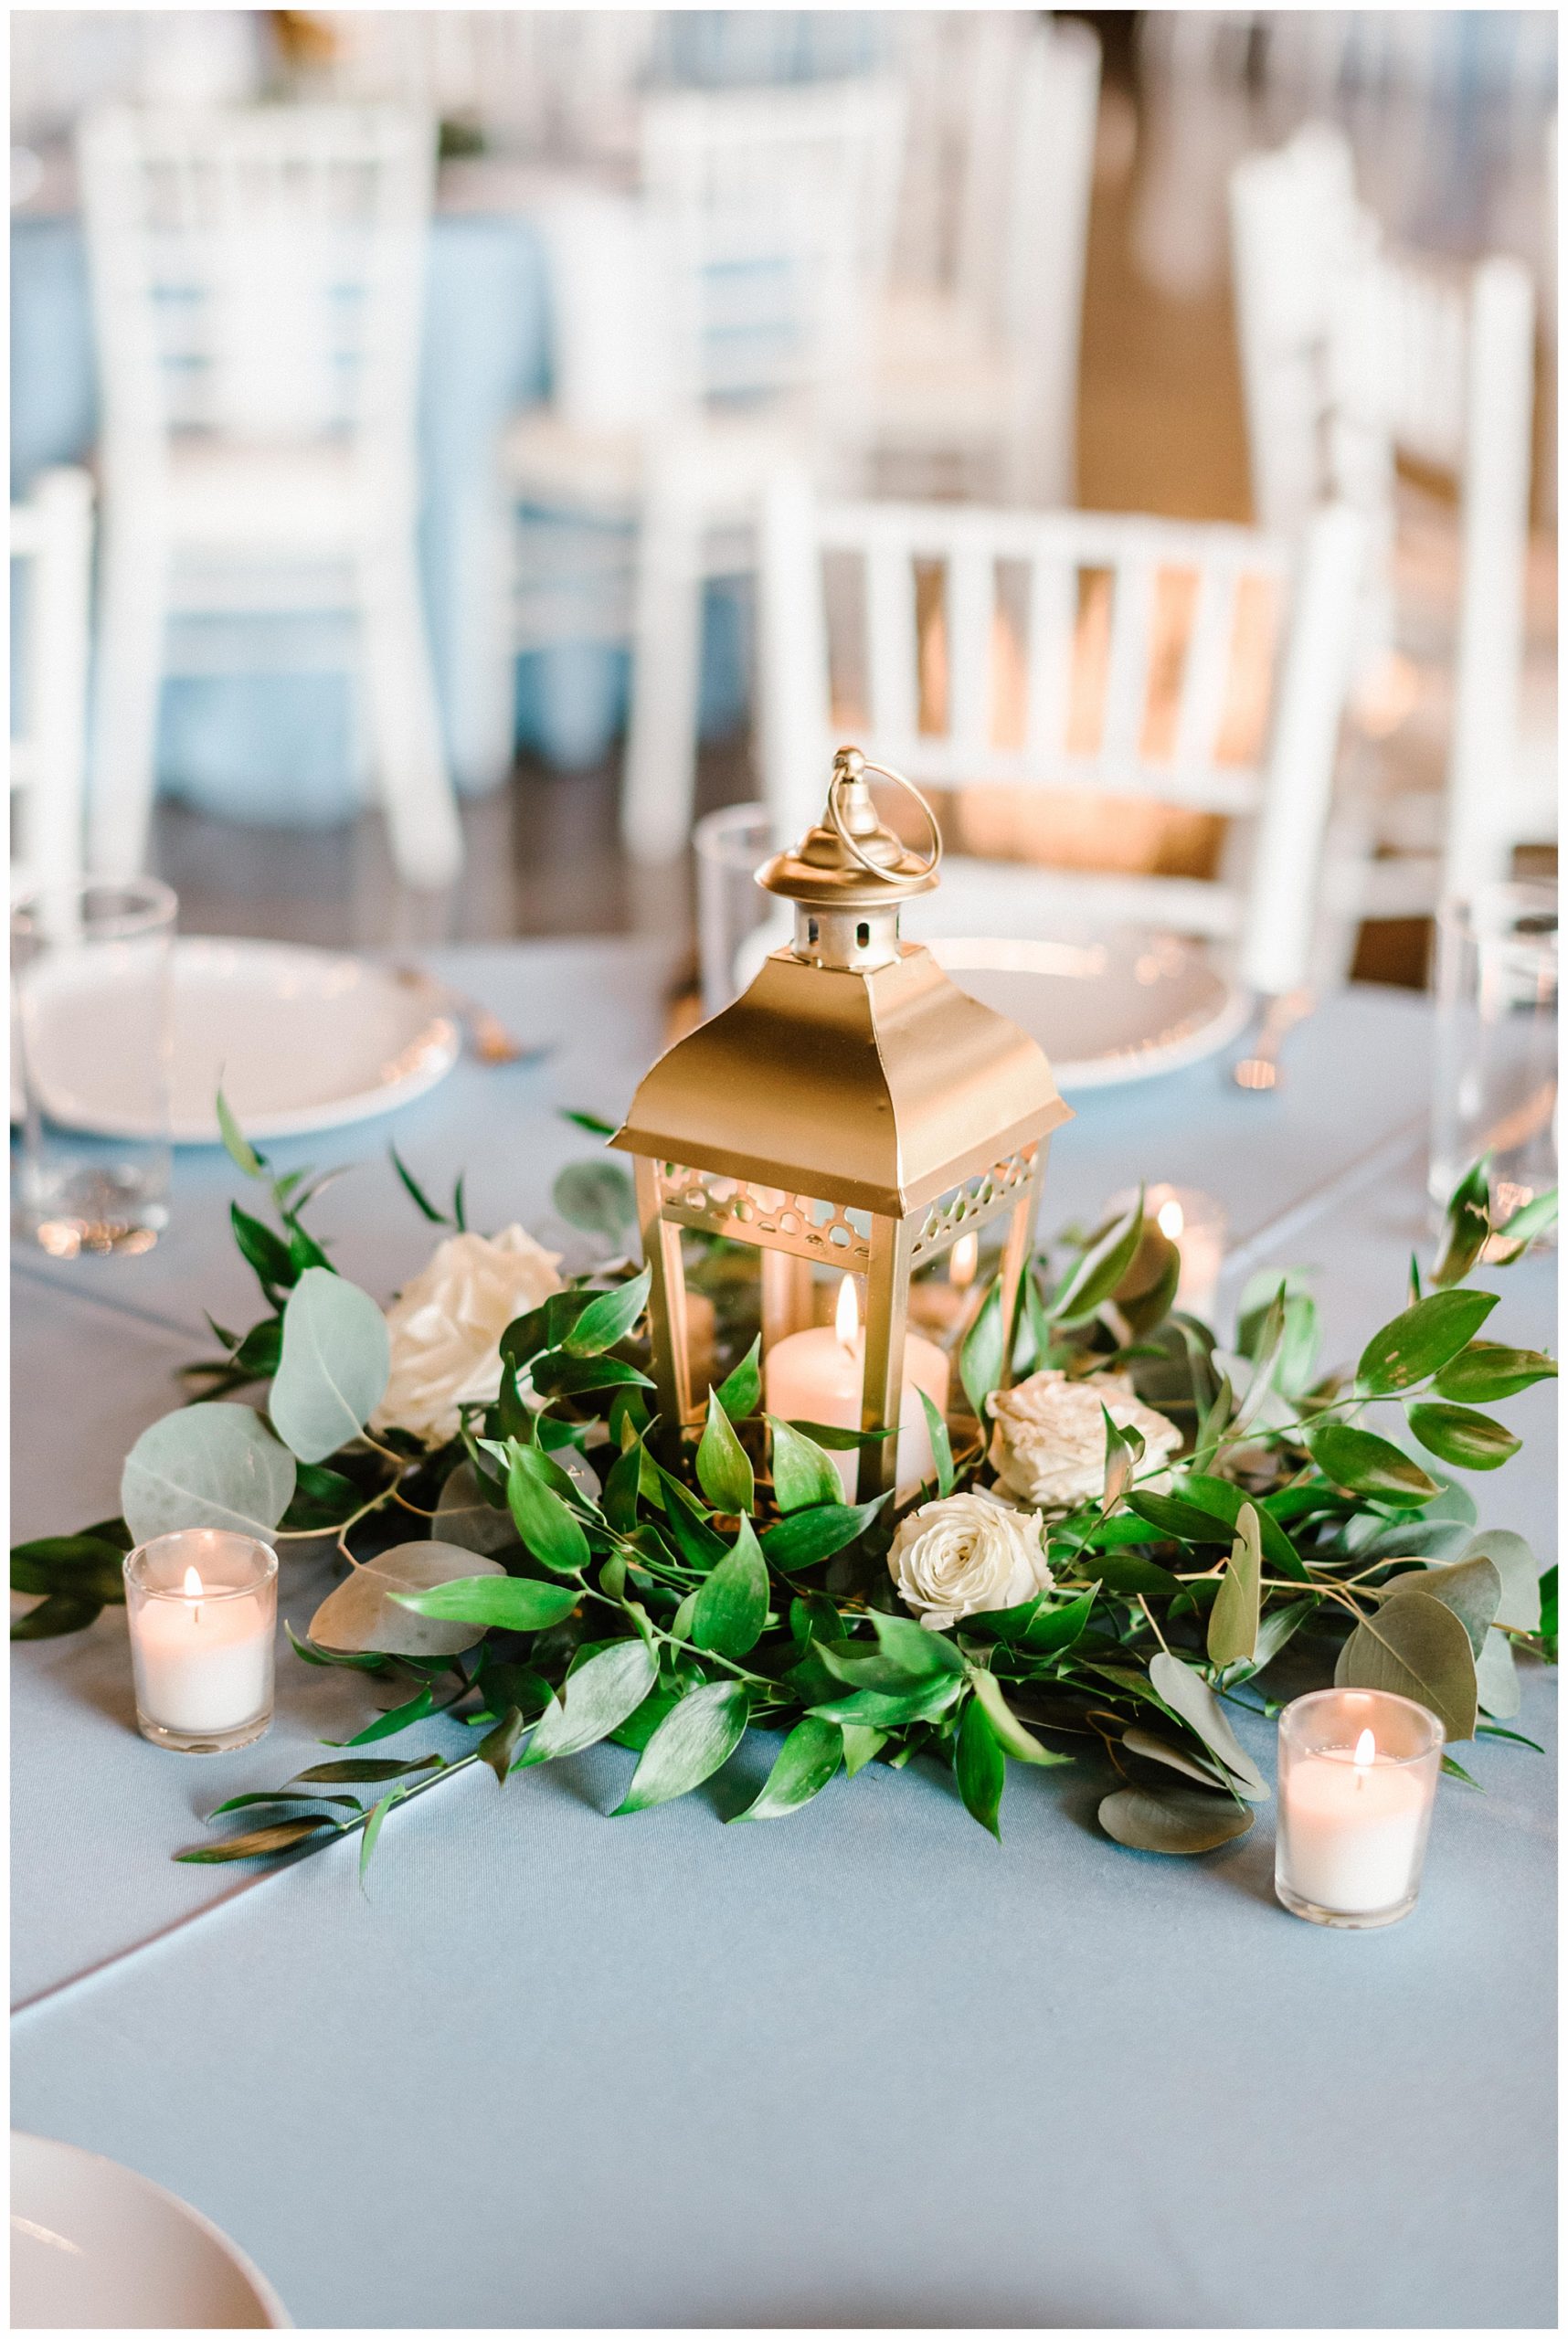 Gold Lantern Table Decor with a Warm Glow